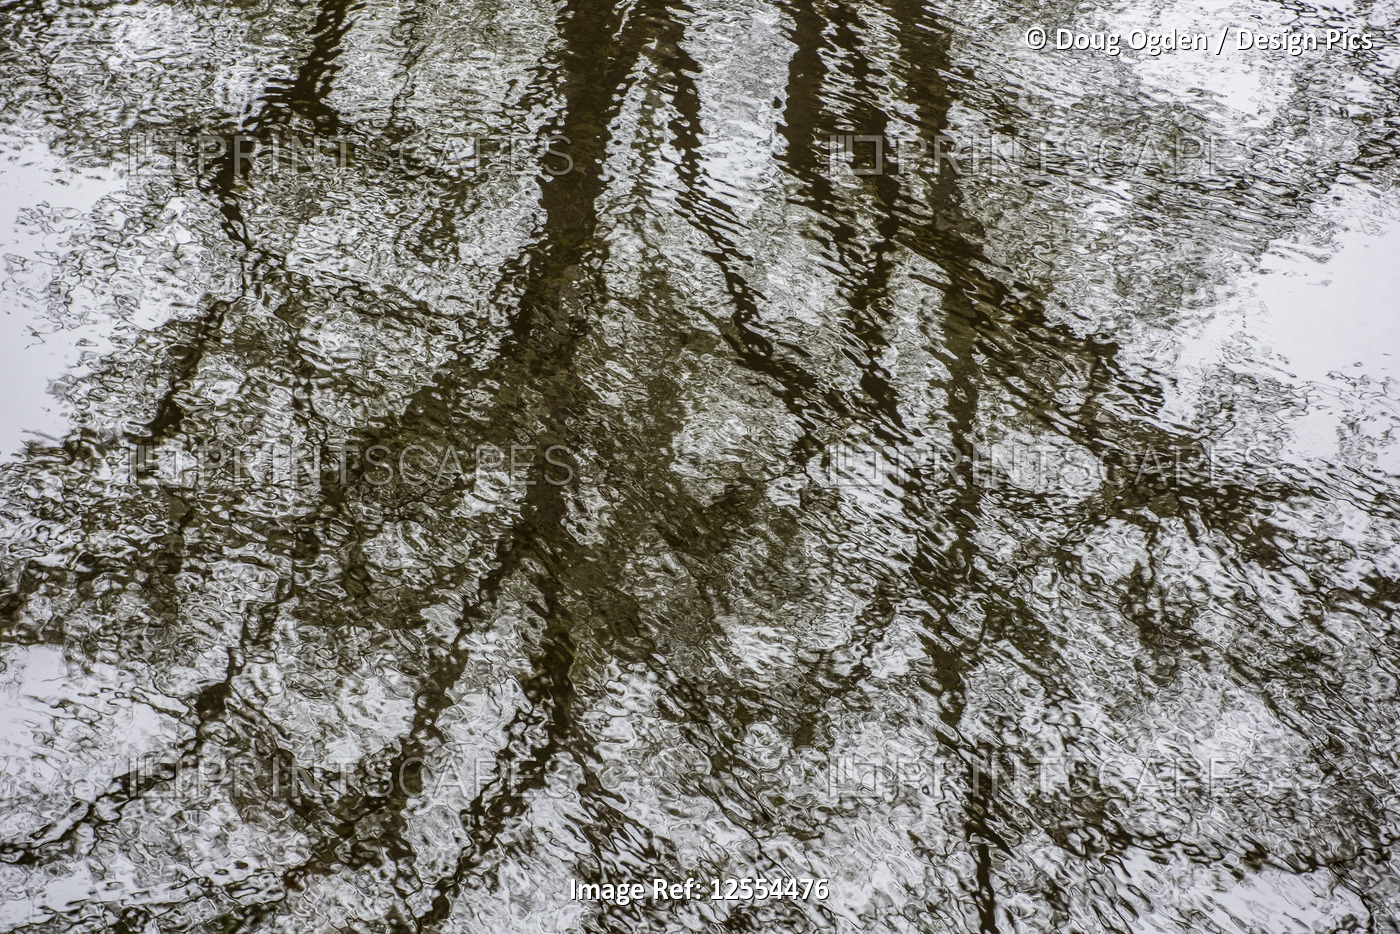 Rippled reflections of a tree on the surface of water; Ocean City, Washington, ...